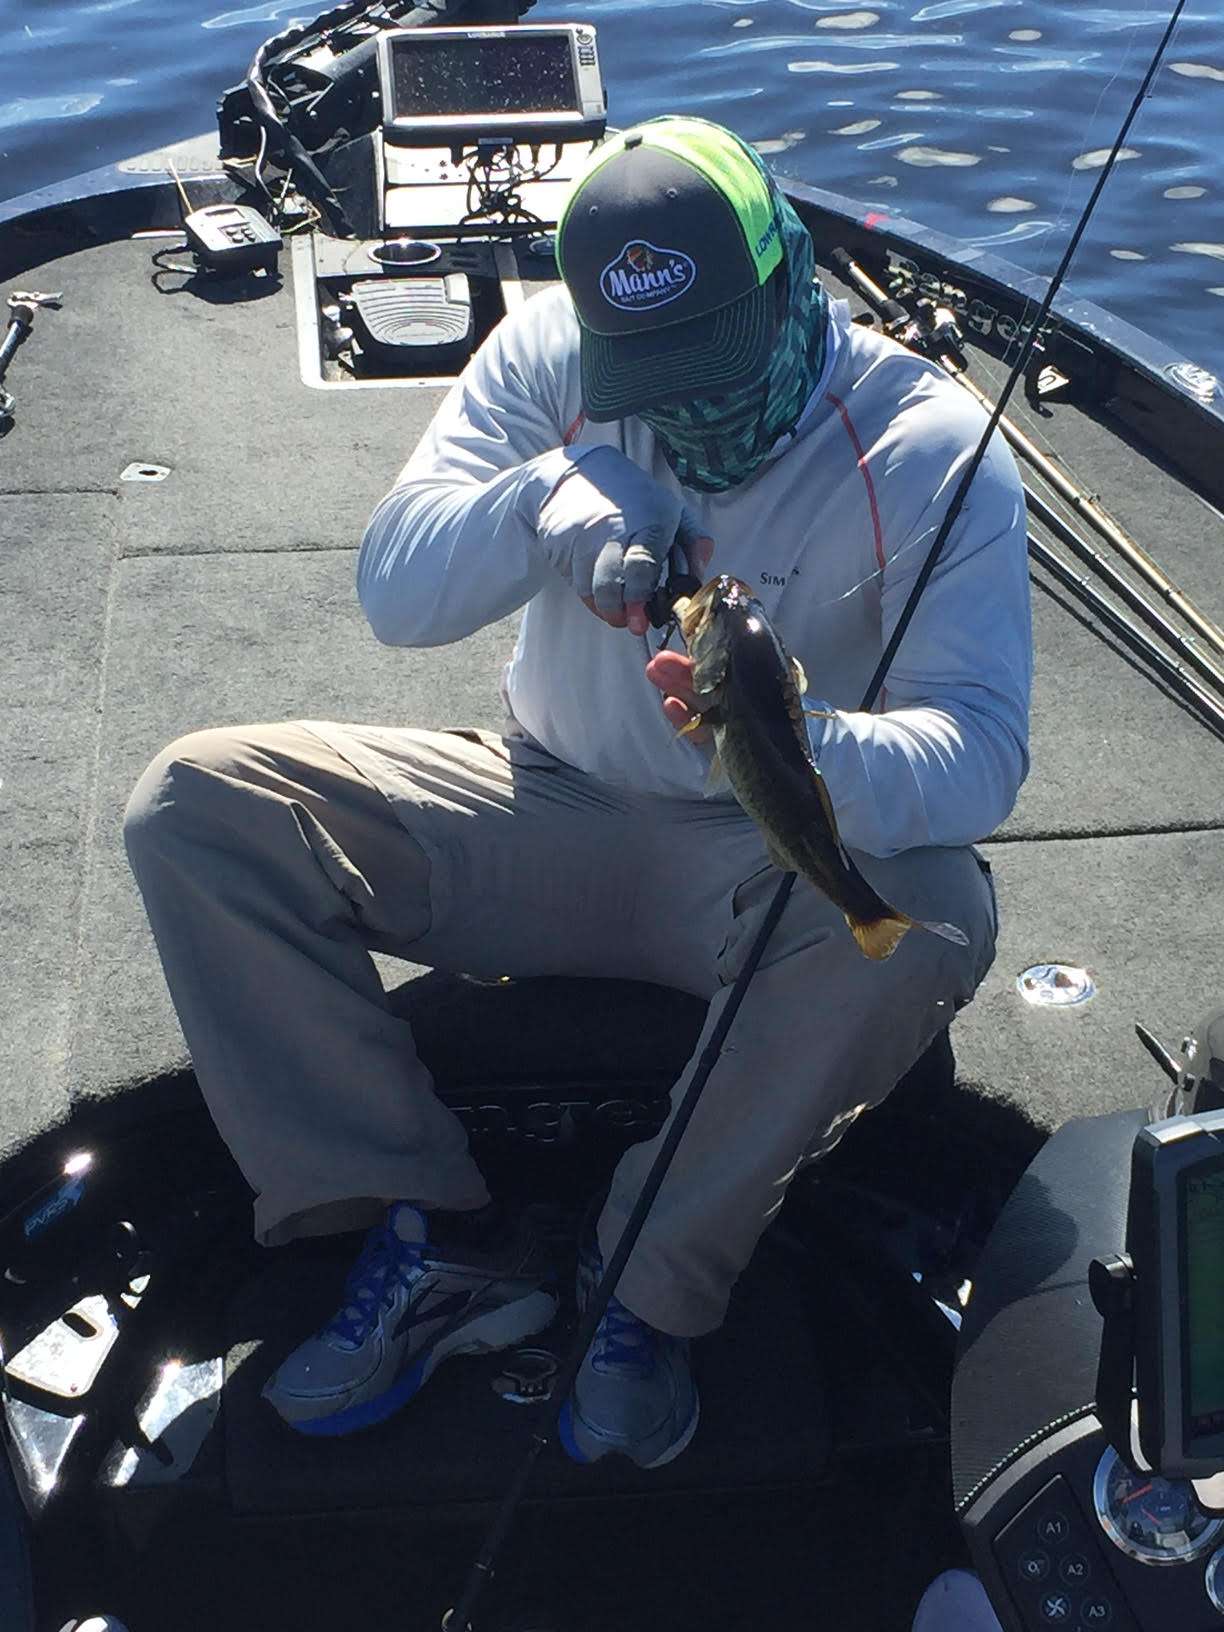 Micah moves back out to casting ChatterBait and catches a 1-pound fish on it. There are a lot of boats on this flat.